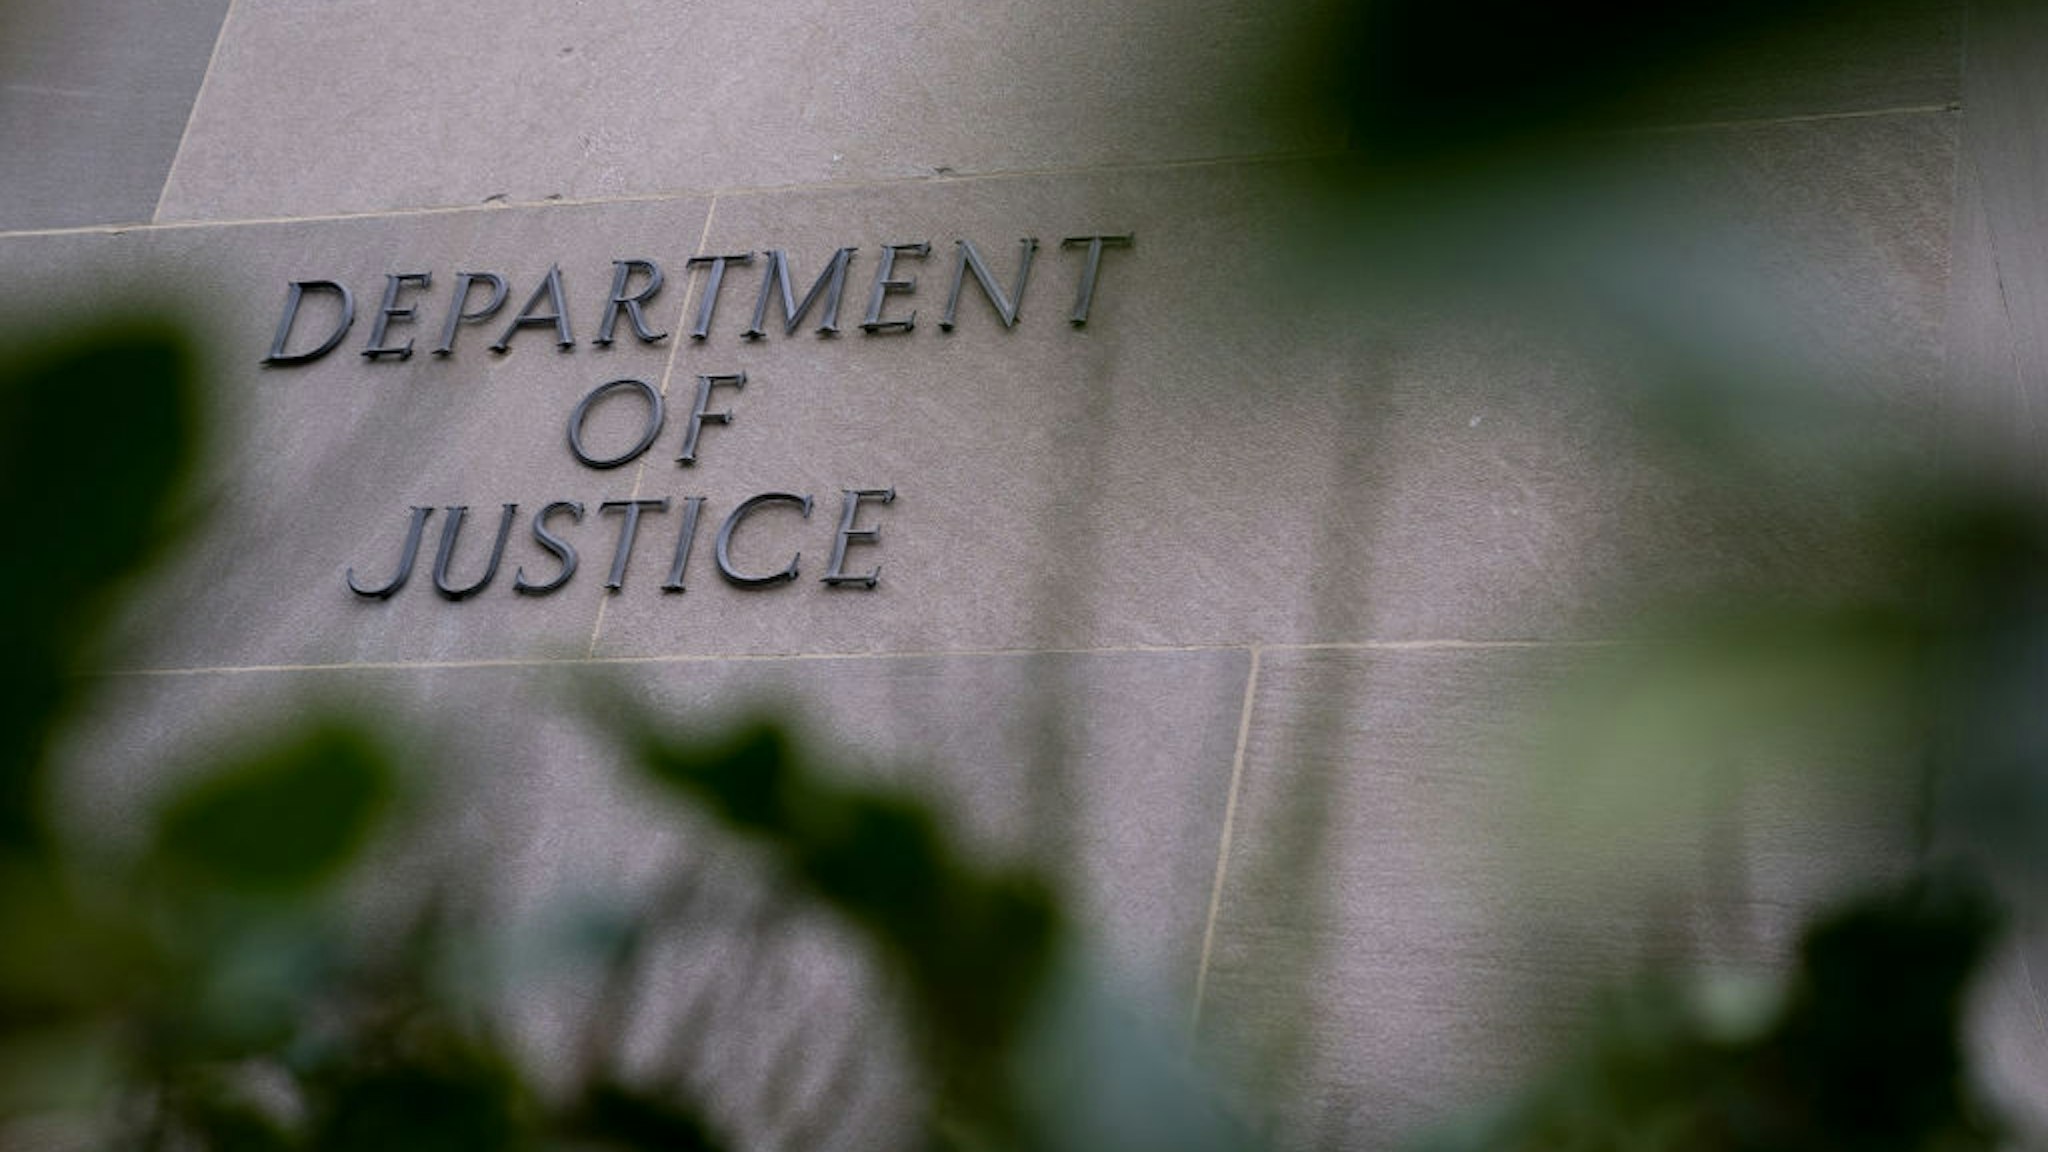 The Department of Justice building in Washington, D.C., U.S., on Friday, Dec. 4, 2020. Prospects for a pandemic relief package before the end of the year grew substantially as senior Republicans warmed to the idea of using a $908 billion proposal from a bipartisan group of lawmakers as the basis for a deal.